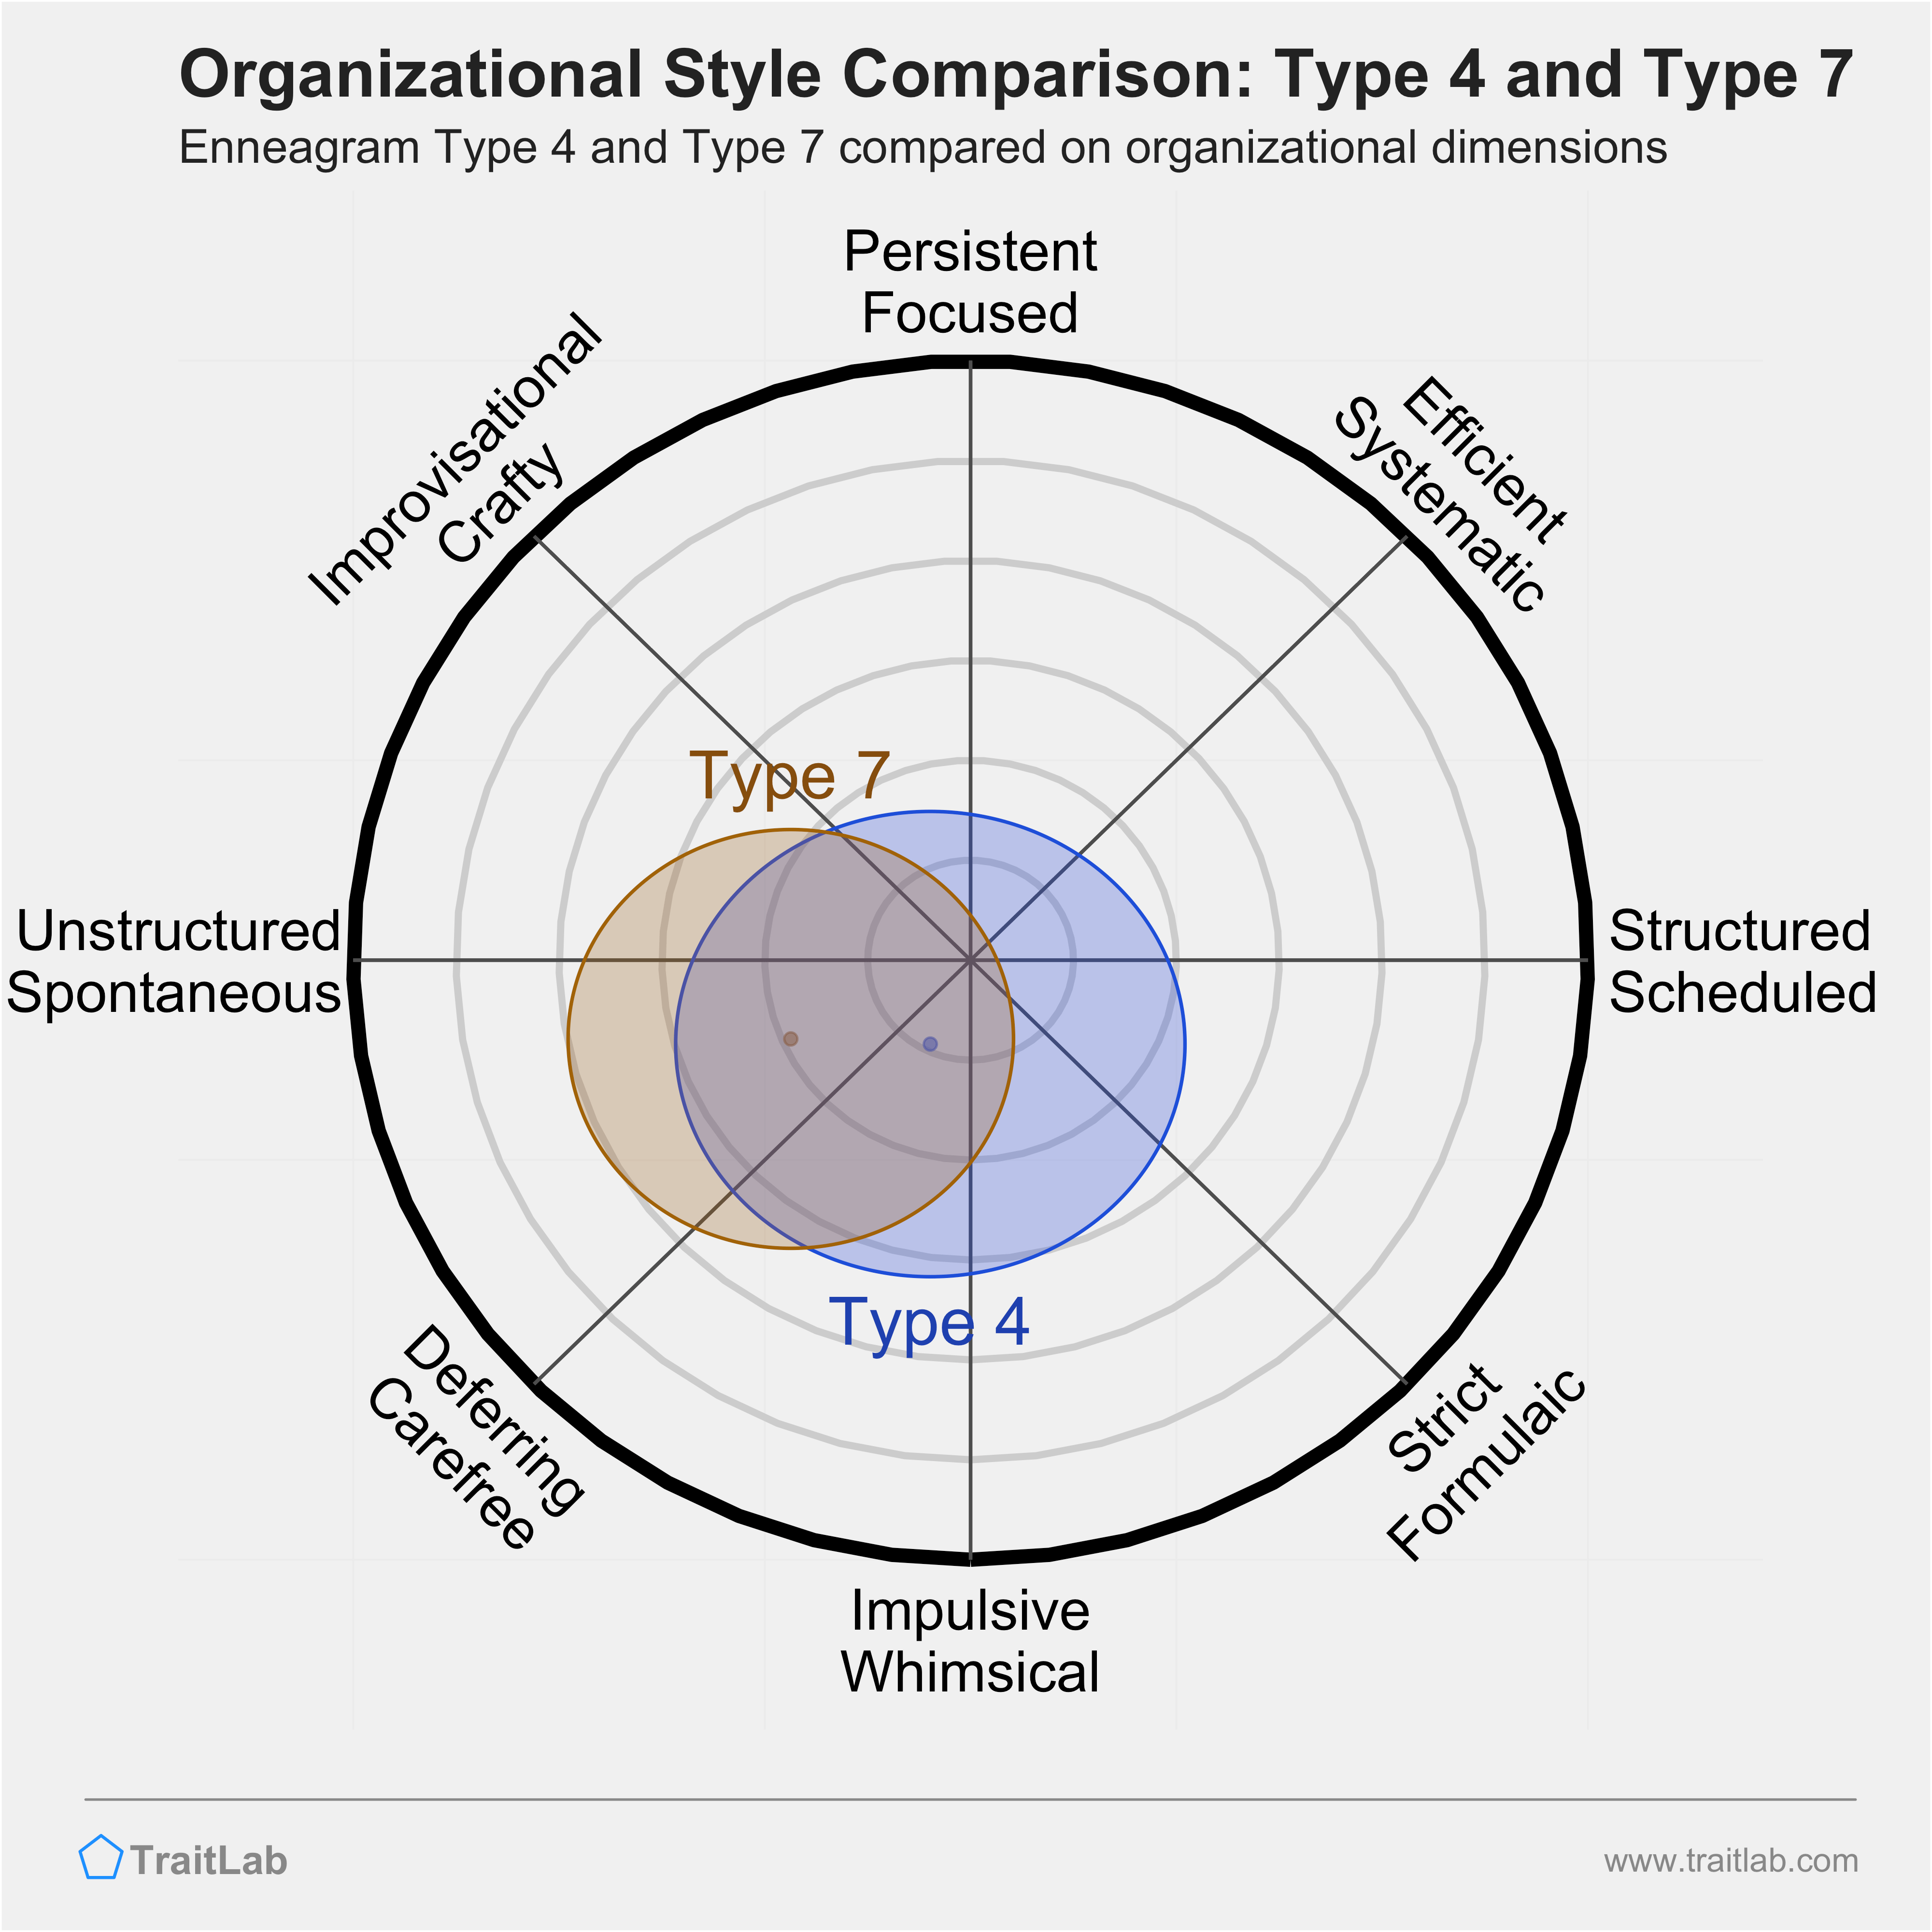 Type 4 and Type 7 comparison across organizational dimensions